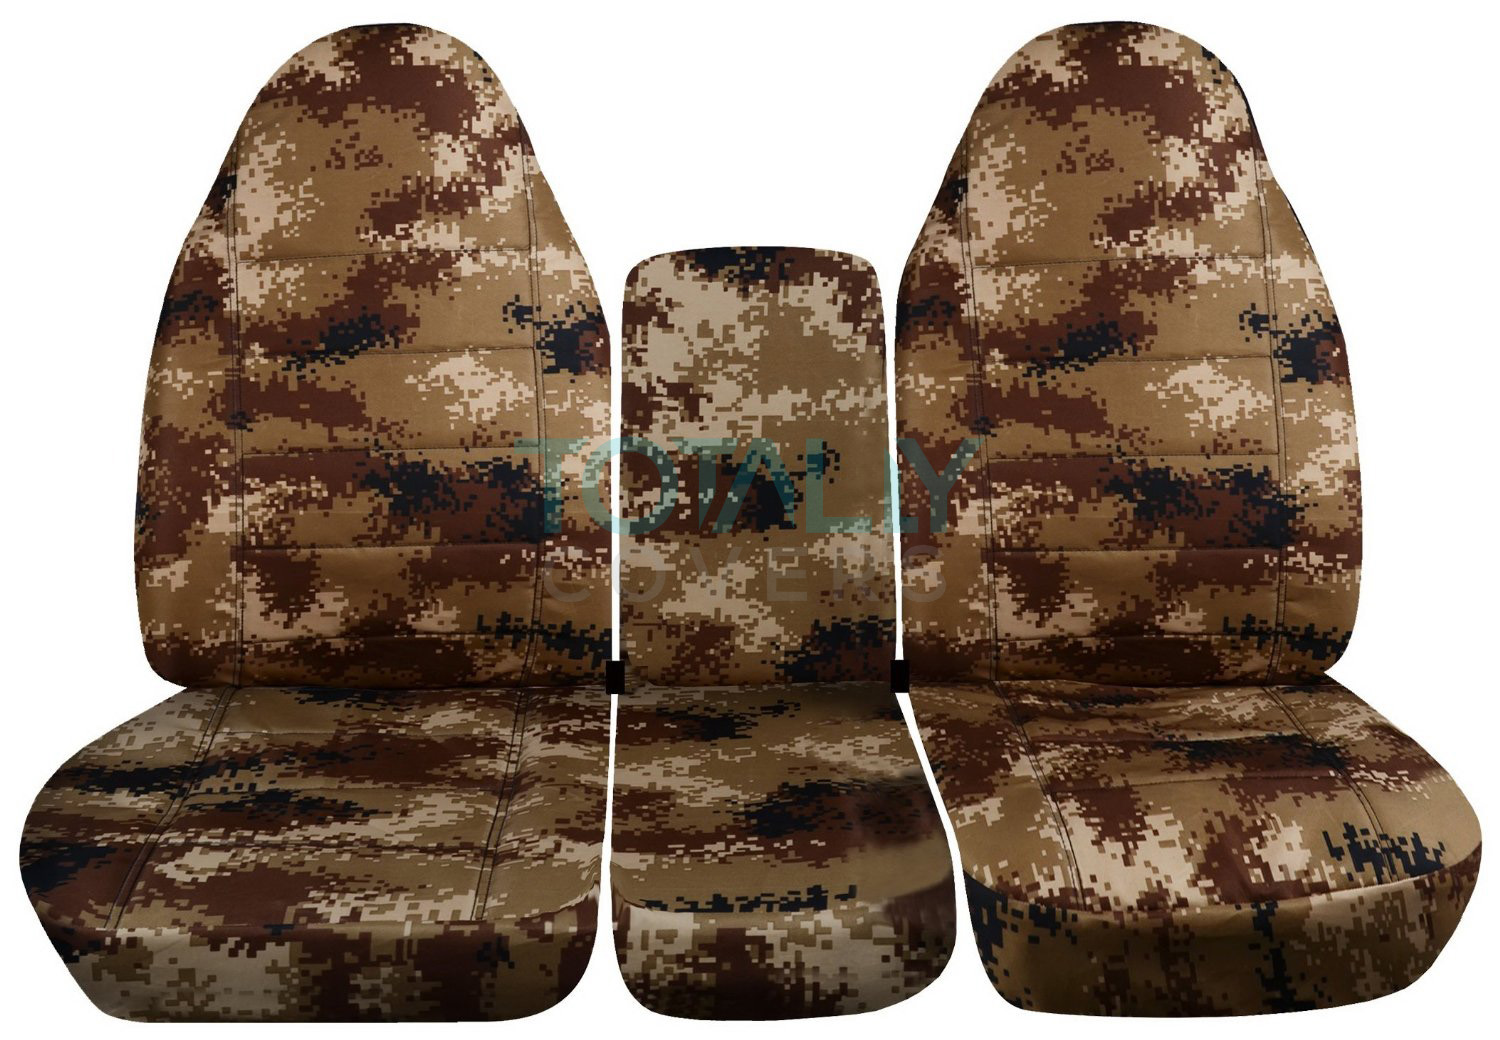 1993-1998 Ford F-Series F-150/250/350 40/20/40 Camo Truck Seat Covers w Console